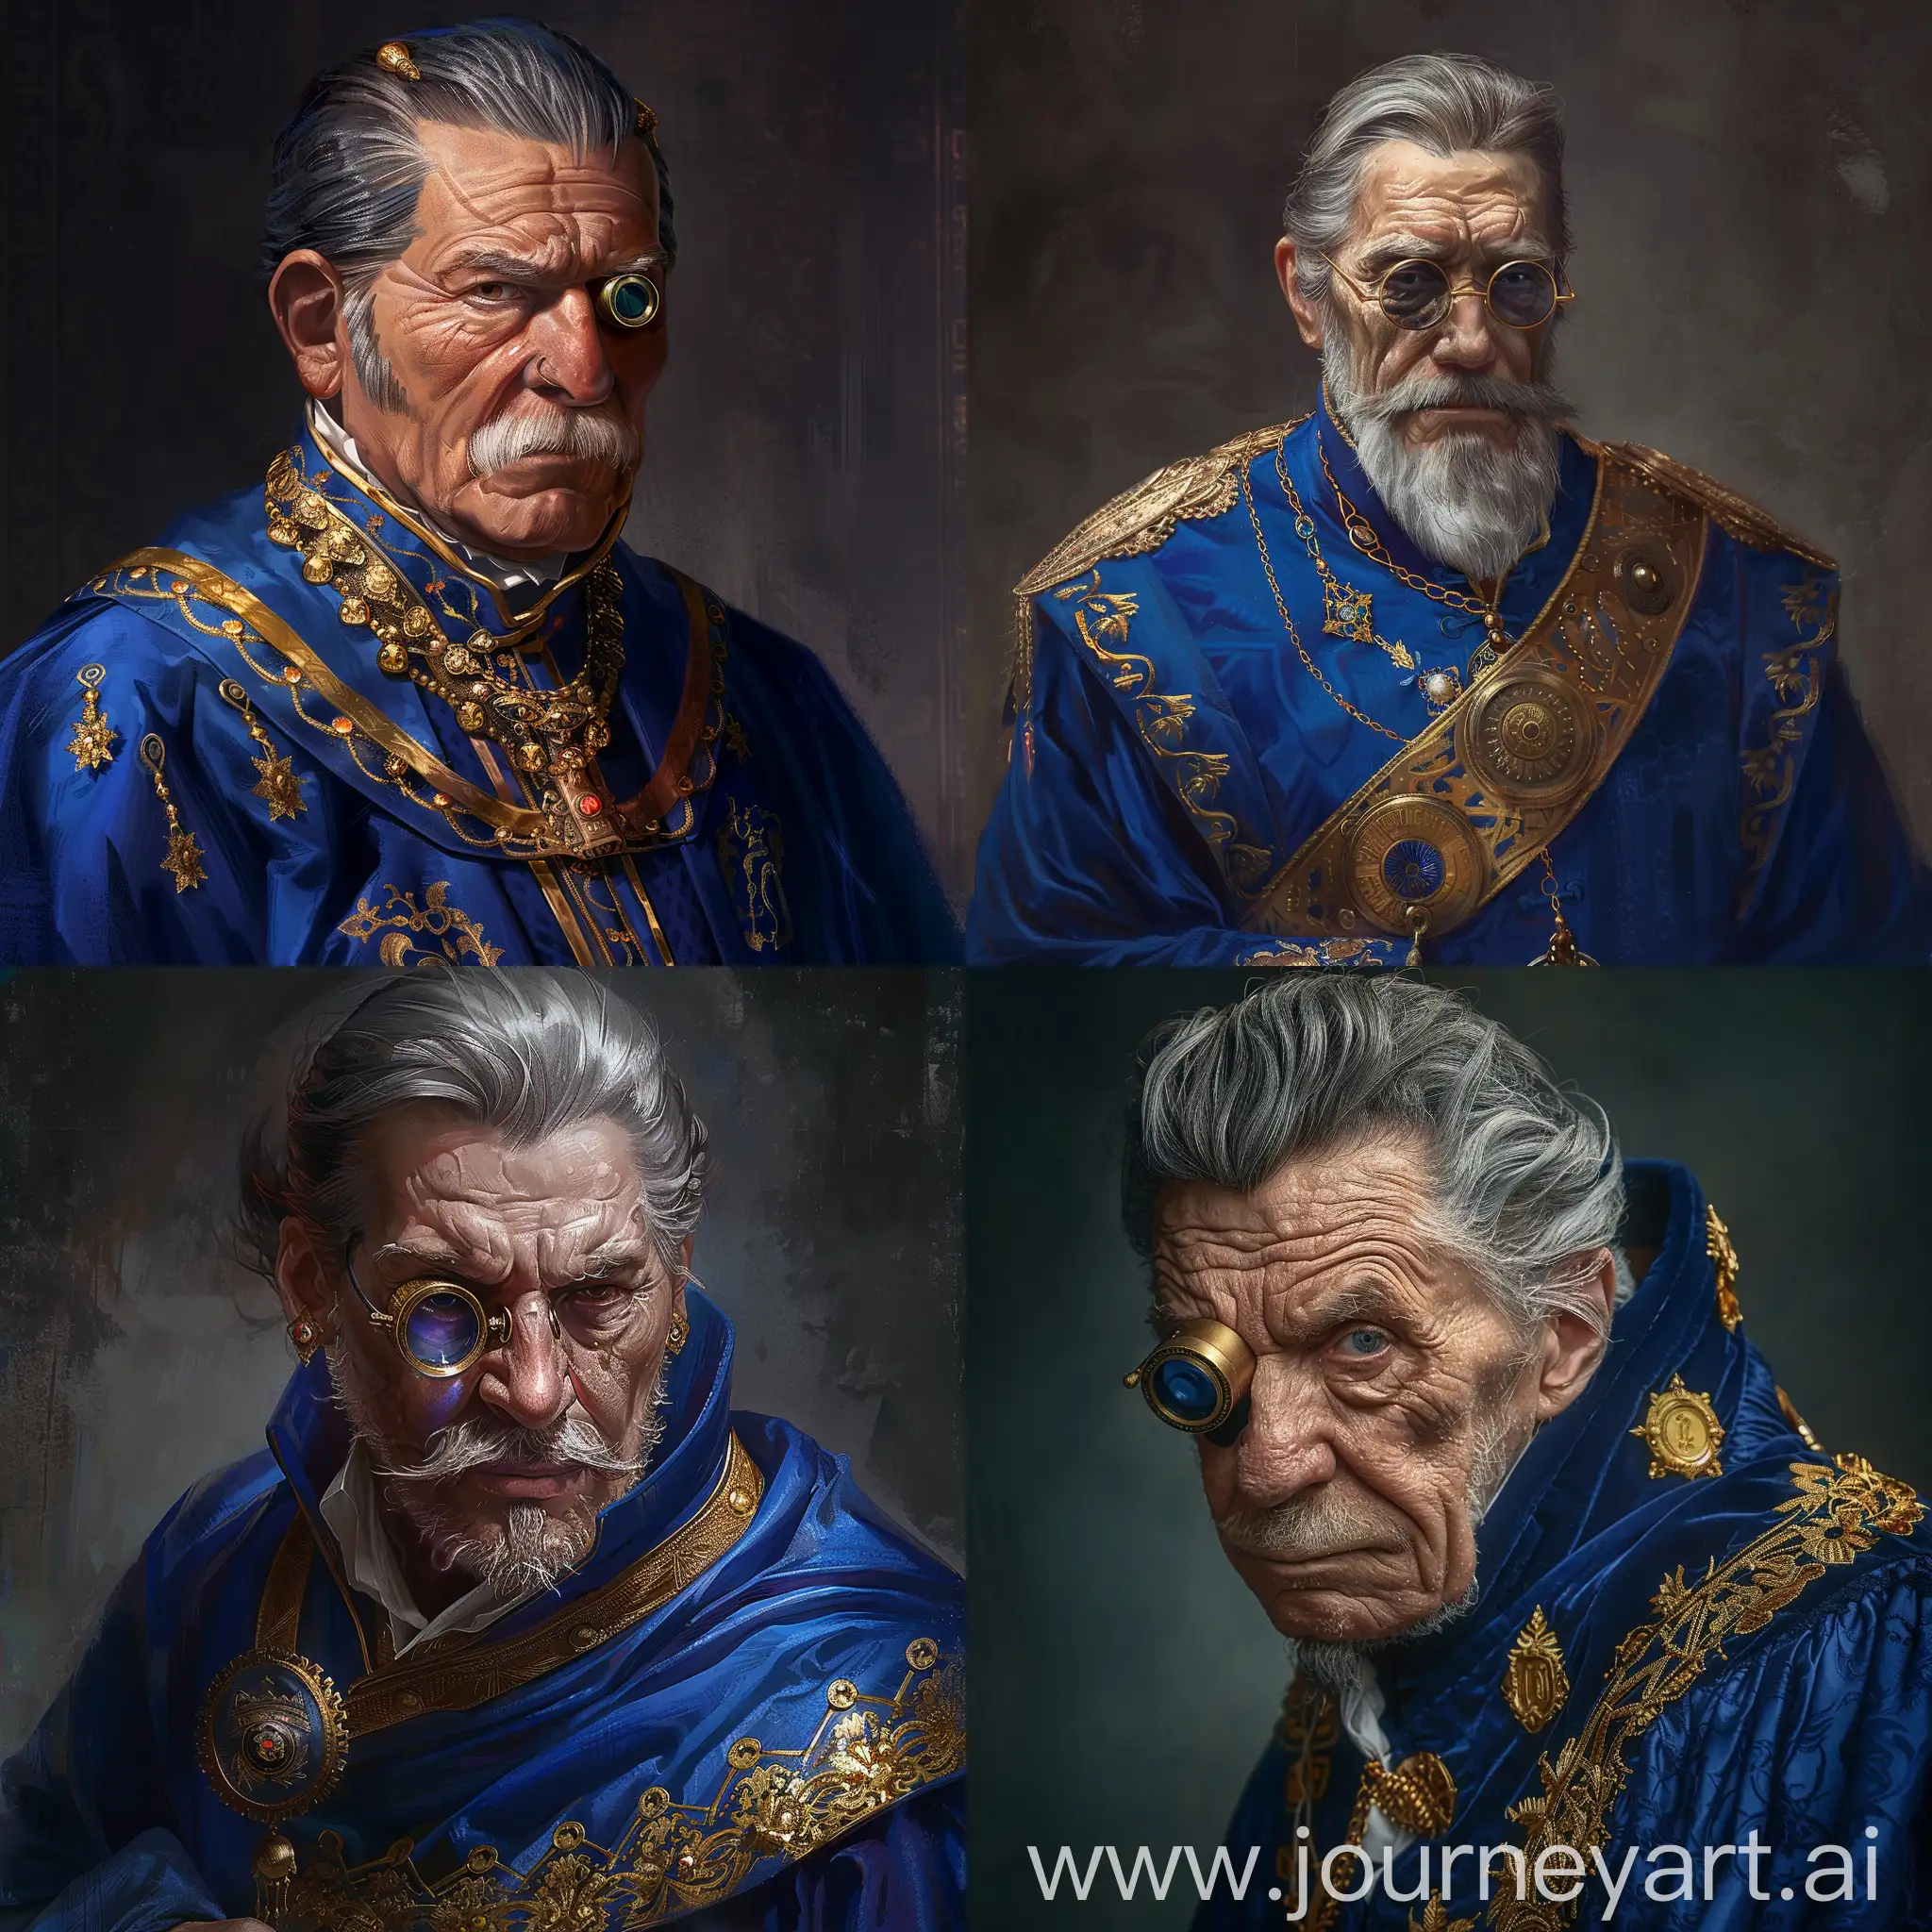 An old northern nobleman, in blue robes with gold ornaments, in a monocle, gray-haired, with sideburns